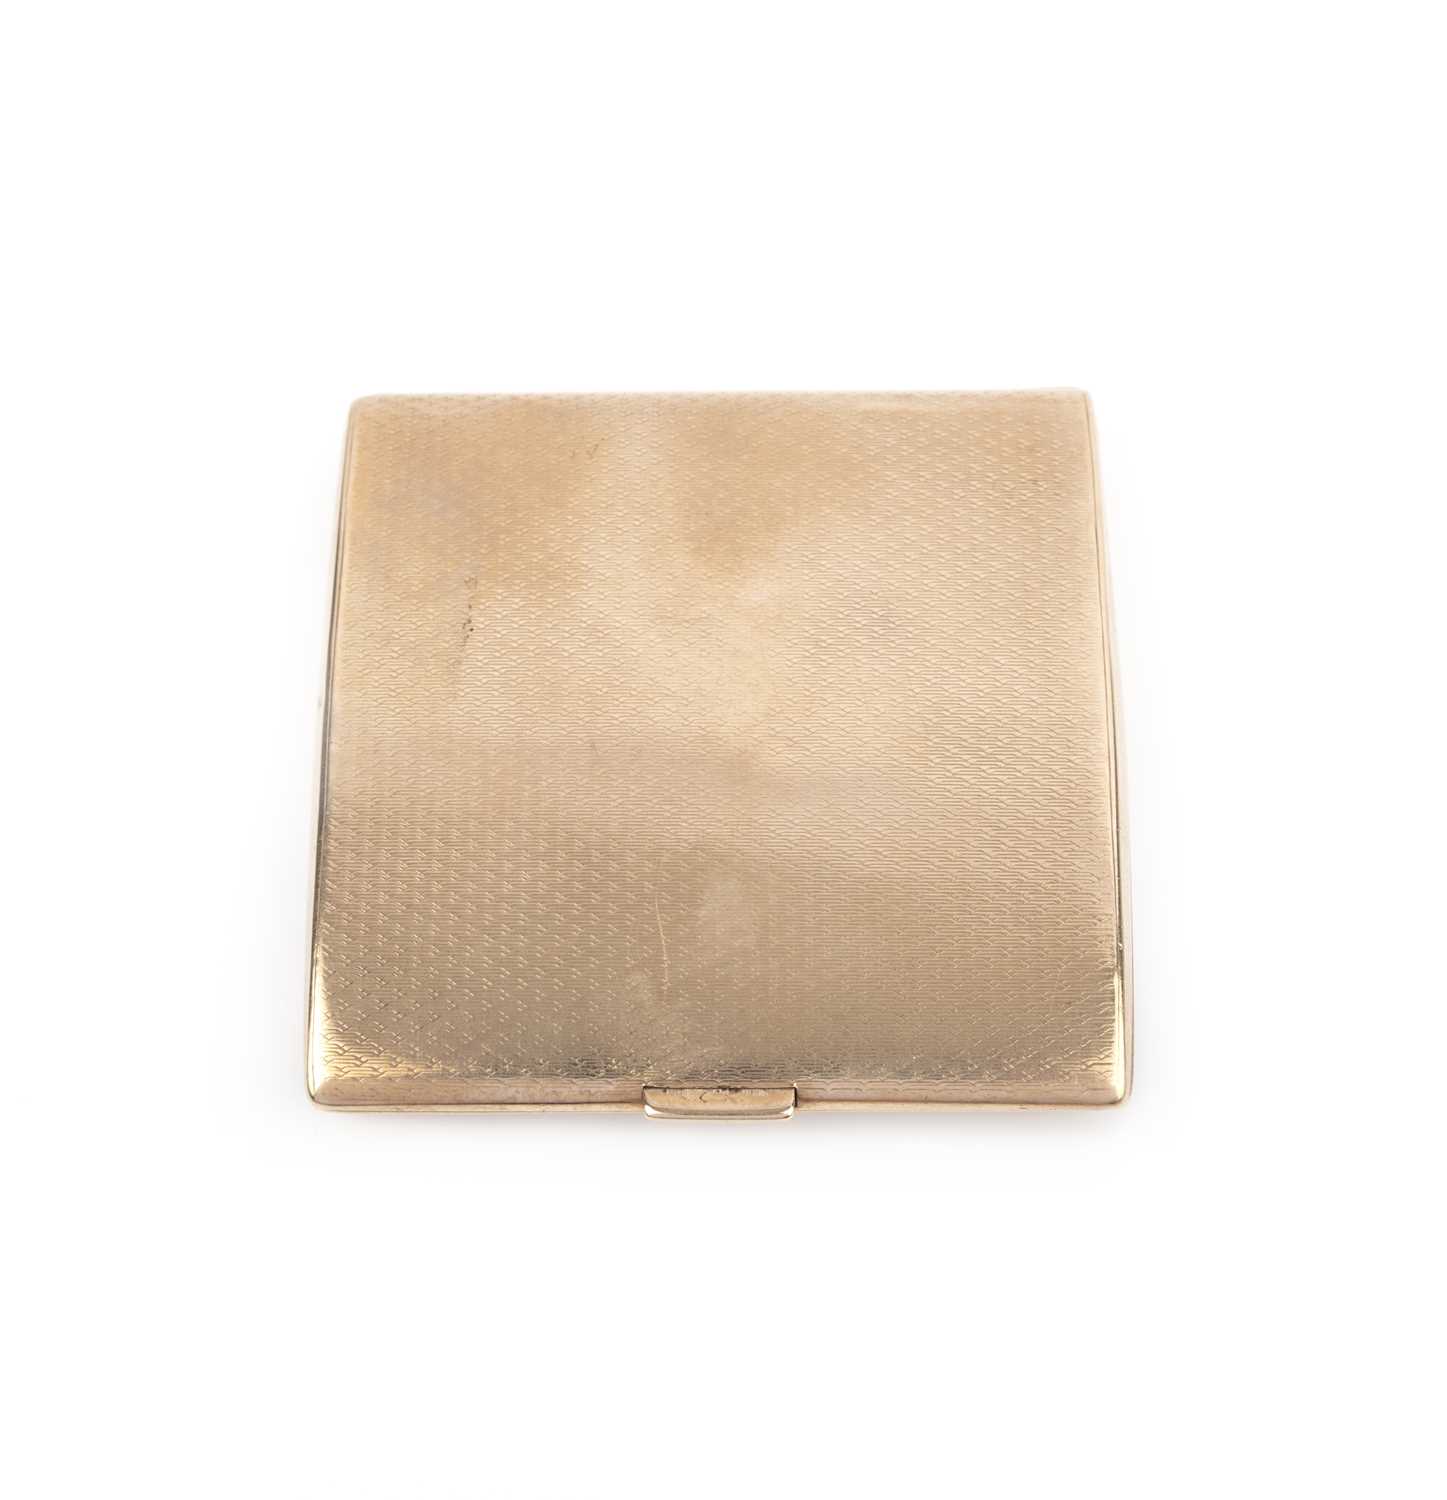 A gold cigarette case, circa 1923, of square outline in 9ct gold, the exterior with engraved